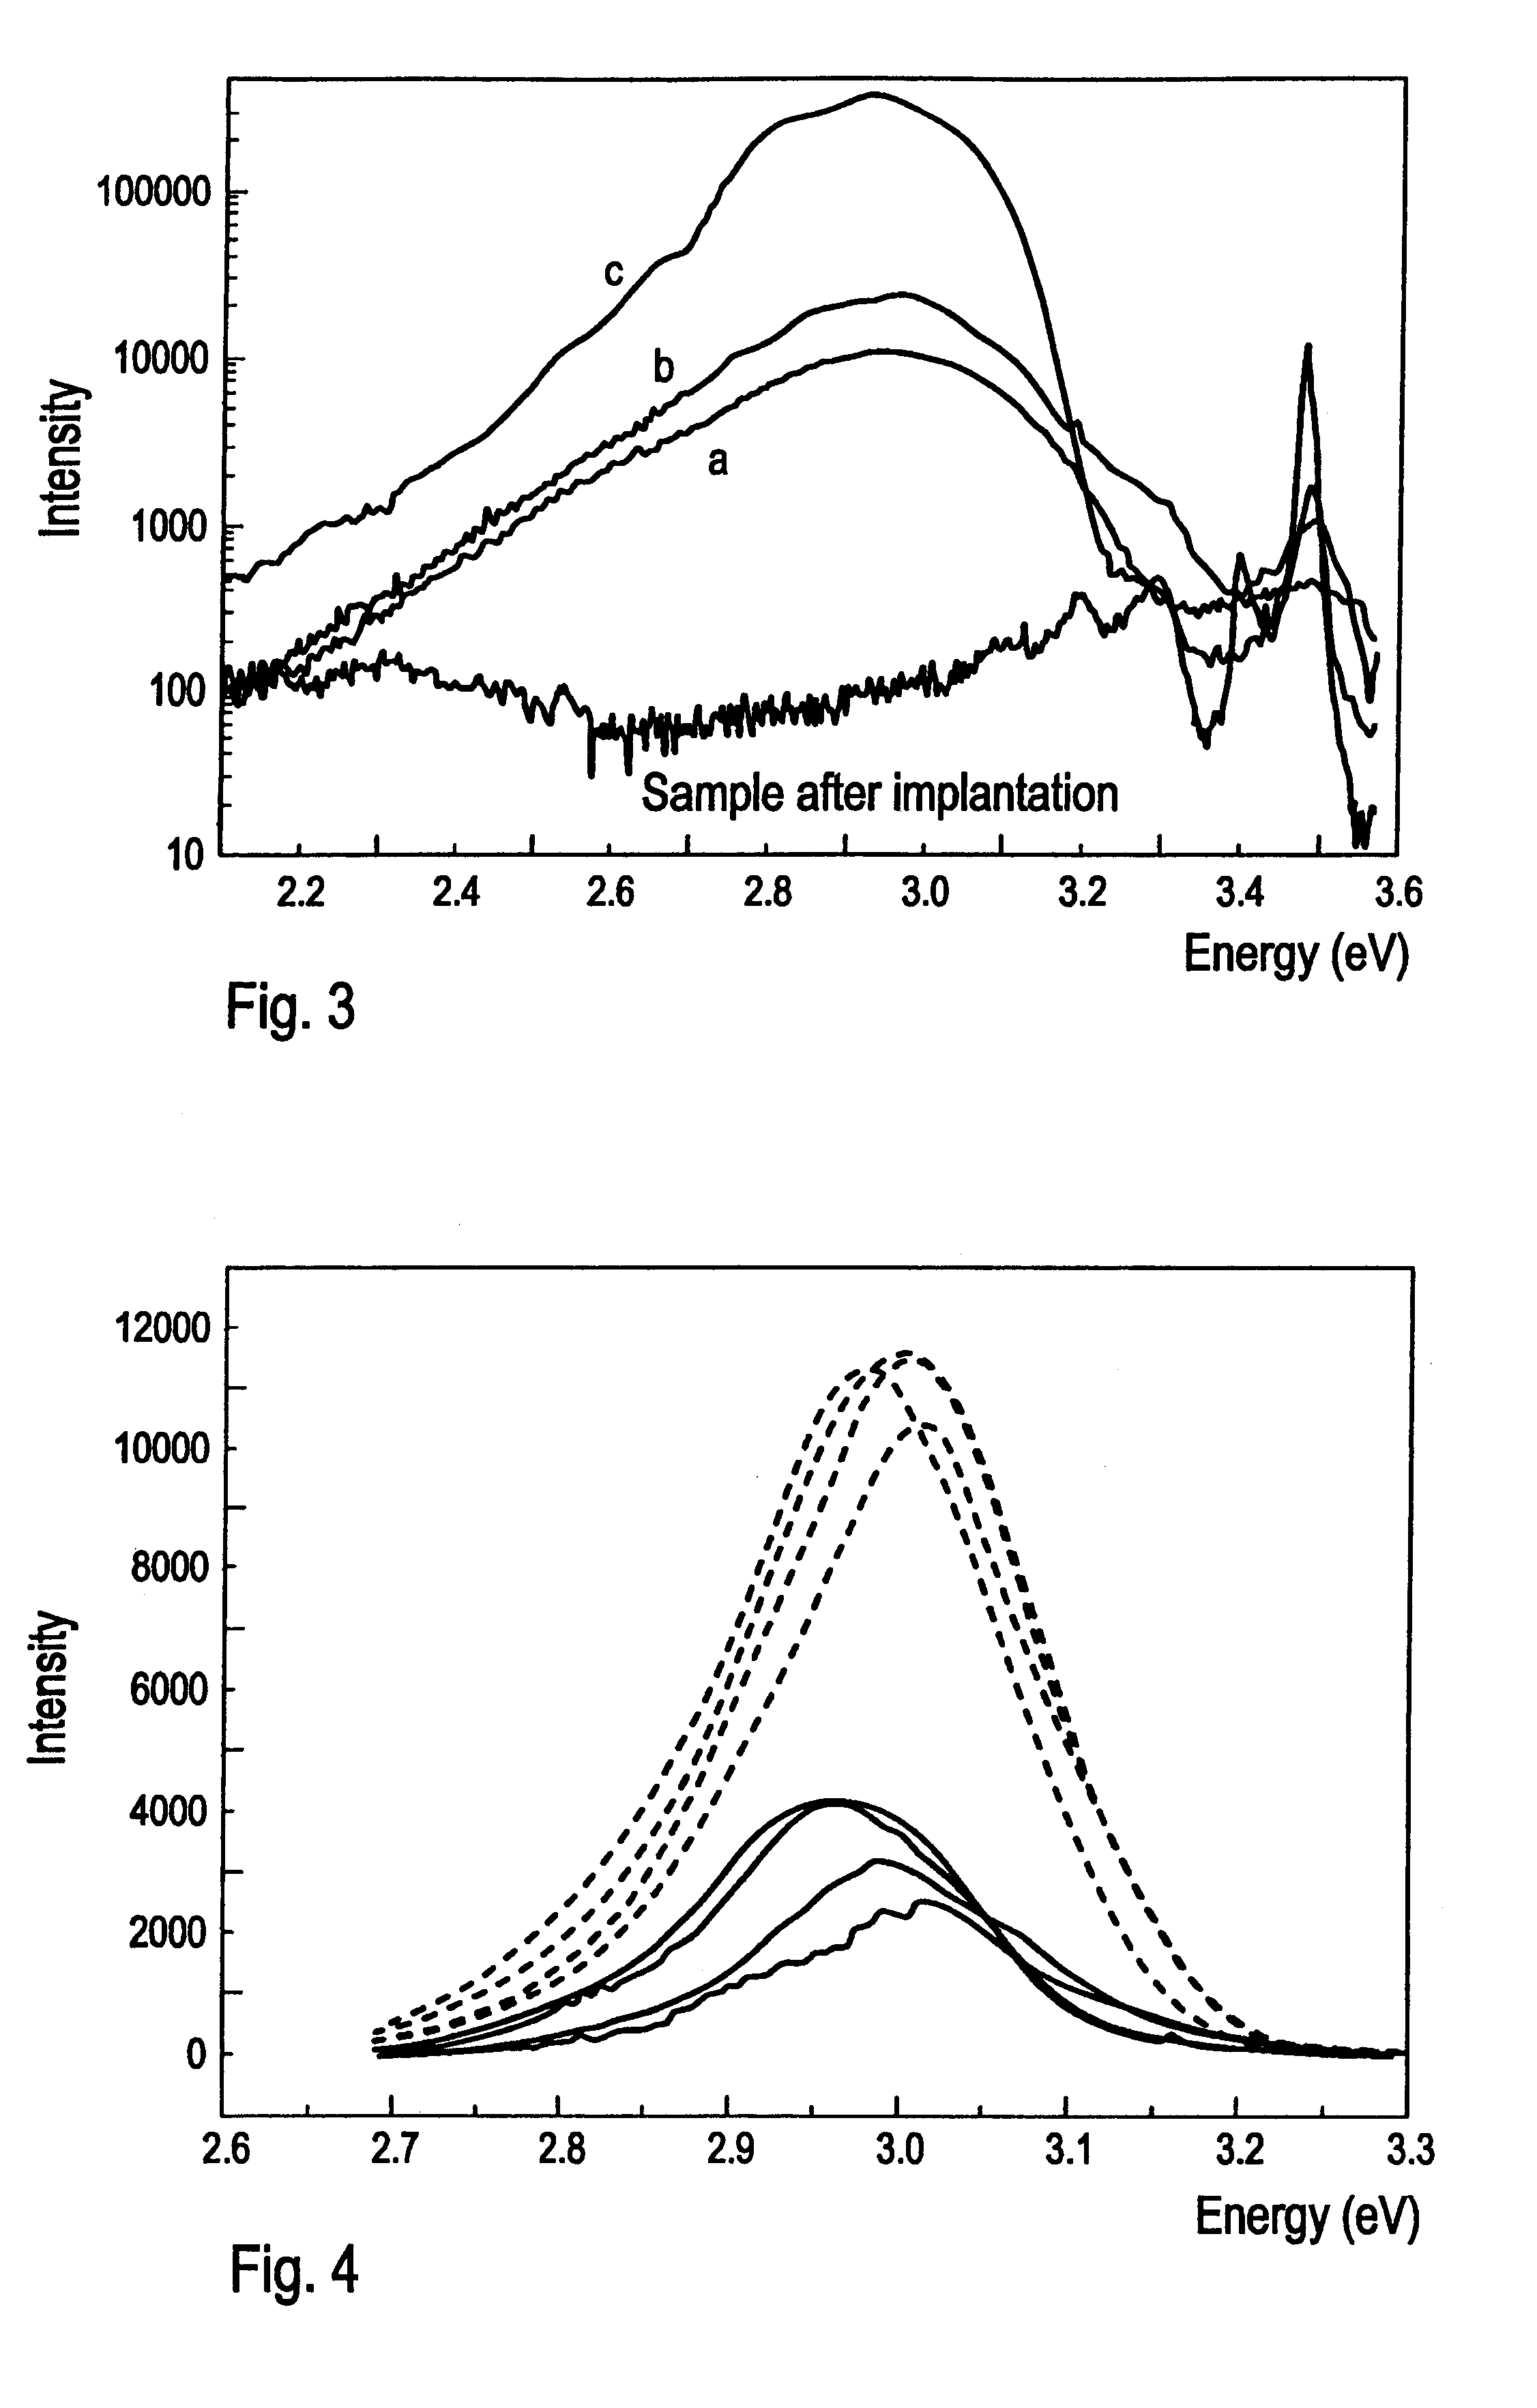 Method of fabrication of semiconducting compounds of nitrides A3B5 of P-and N-type electric conductivity